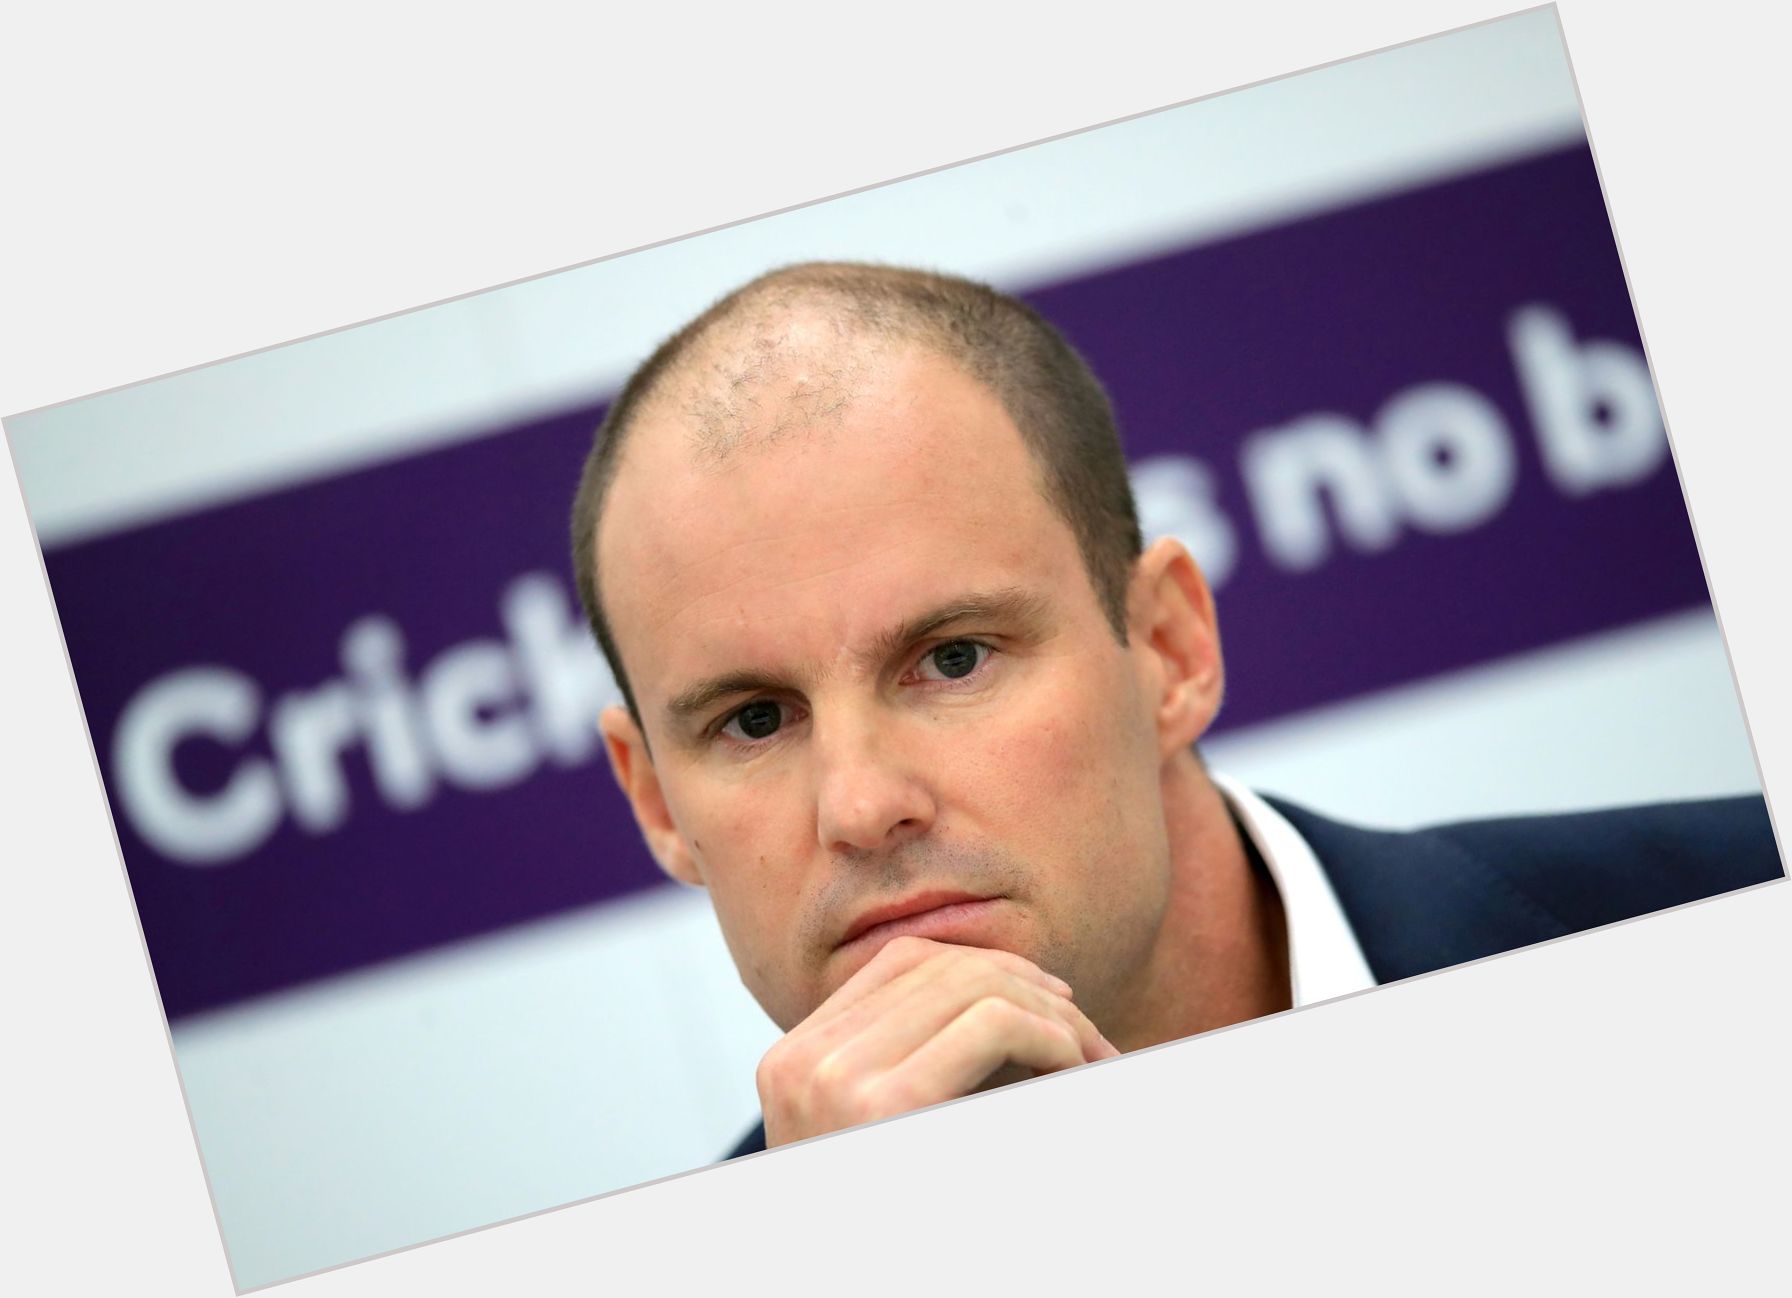 Https://fanpagepress.net/m/A/Andrew Strauss New Pic 1